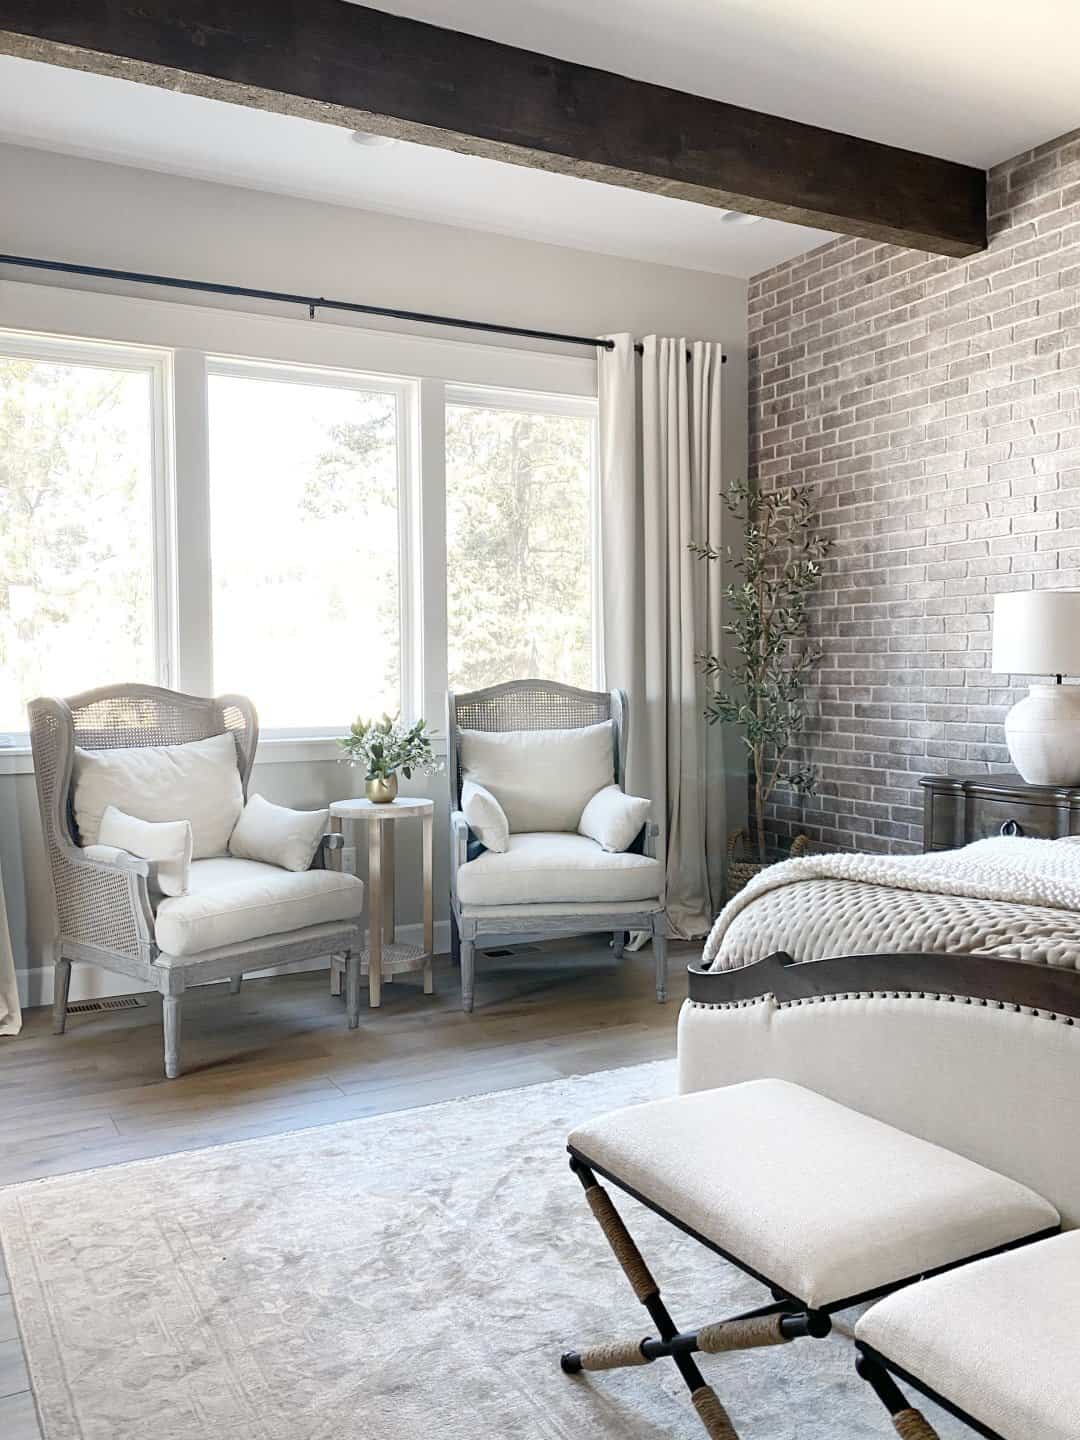 Go All-Gray With Your Sitting Area